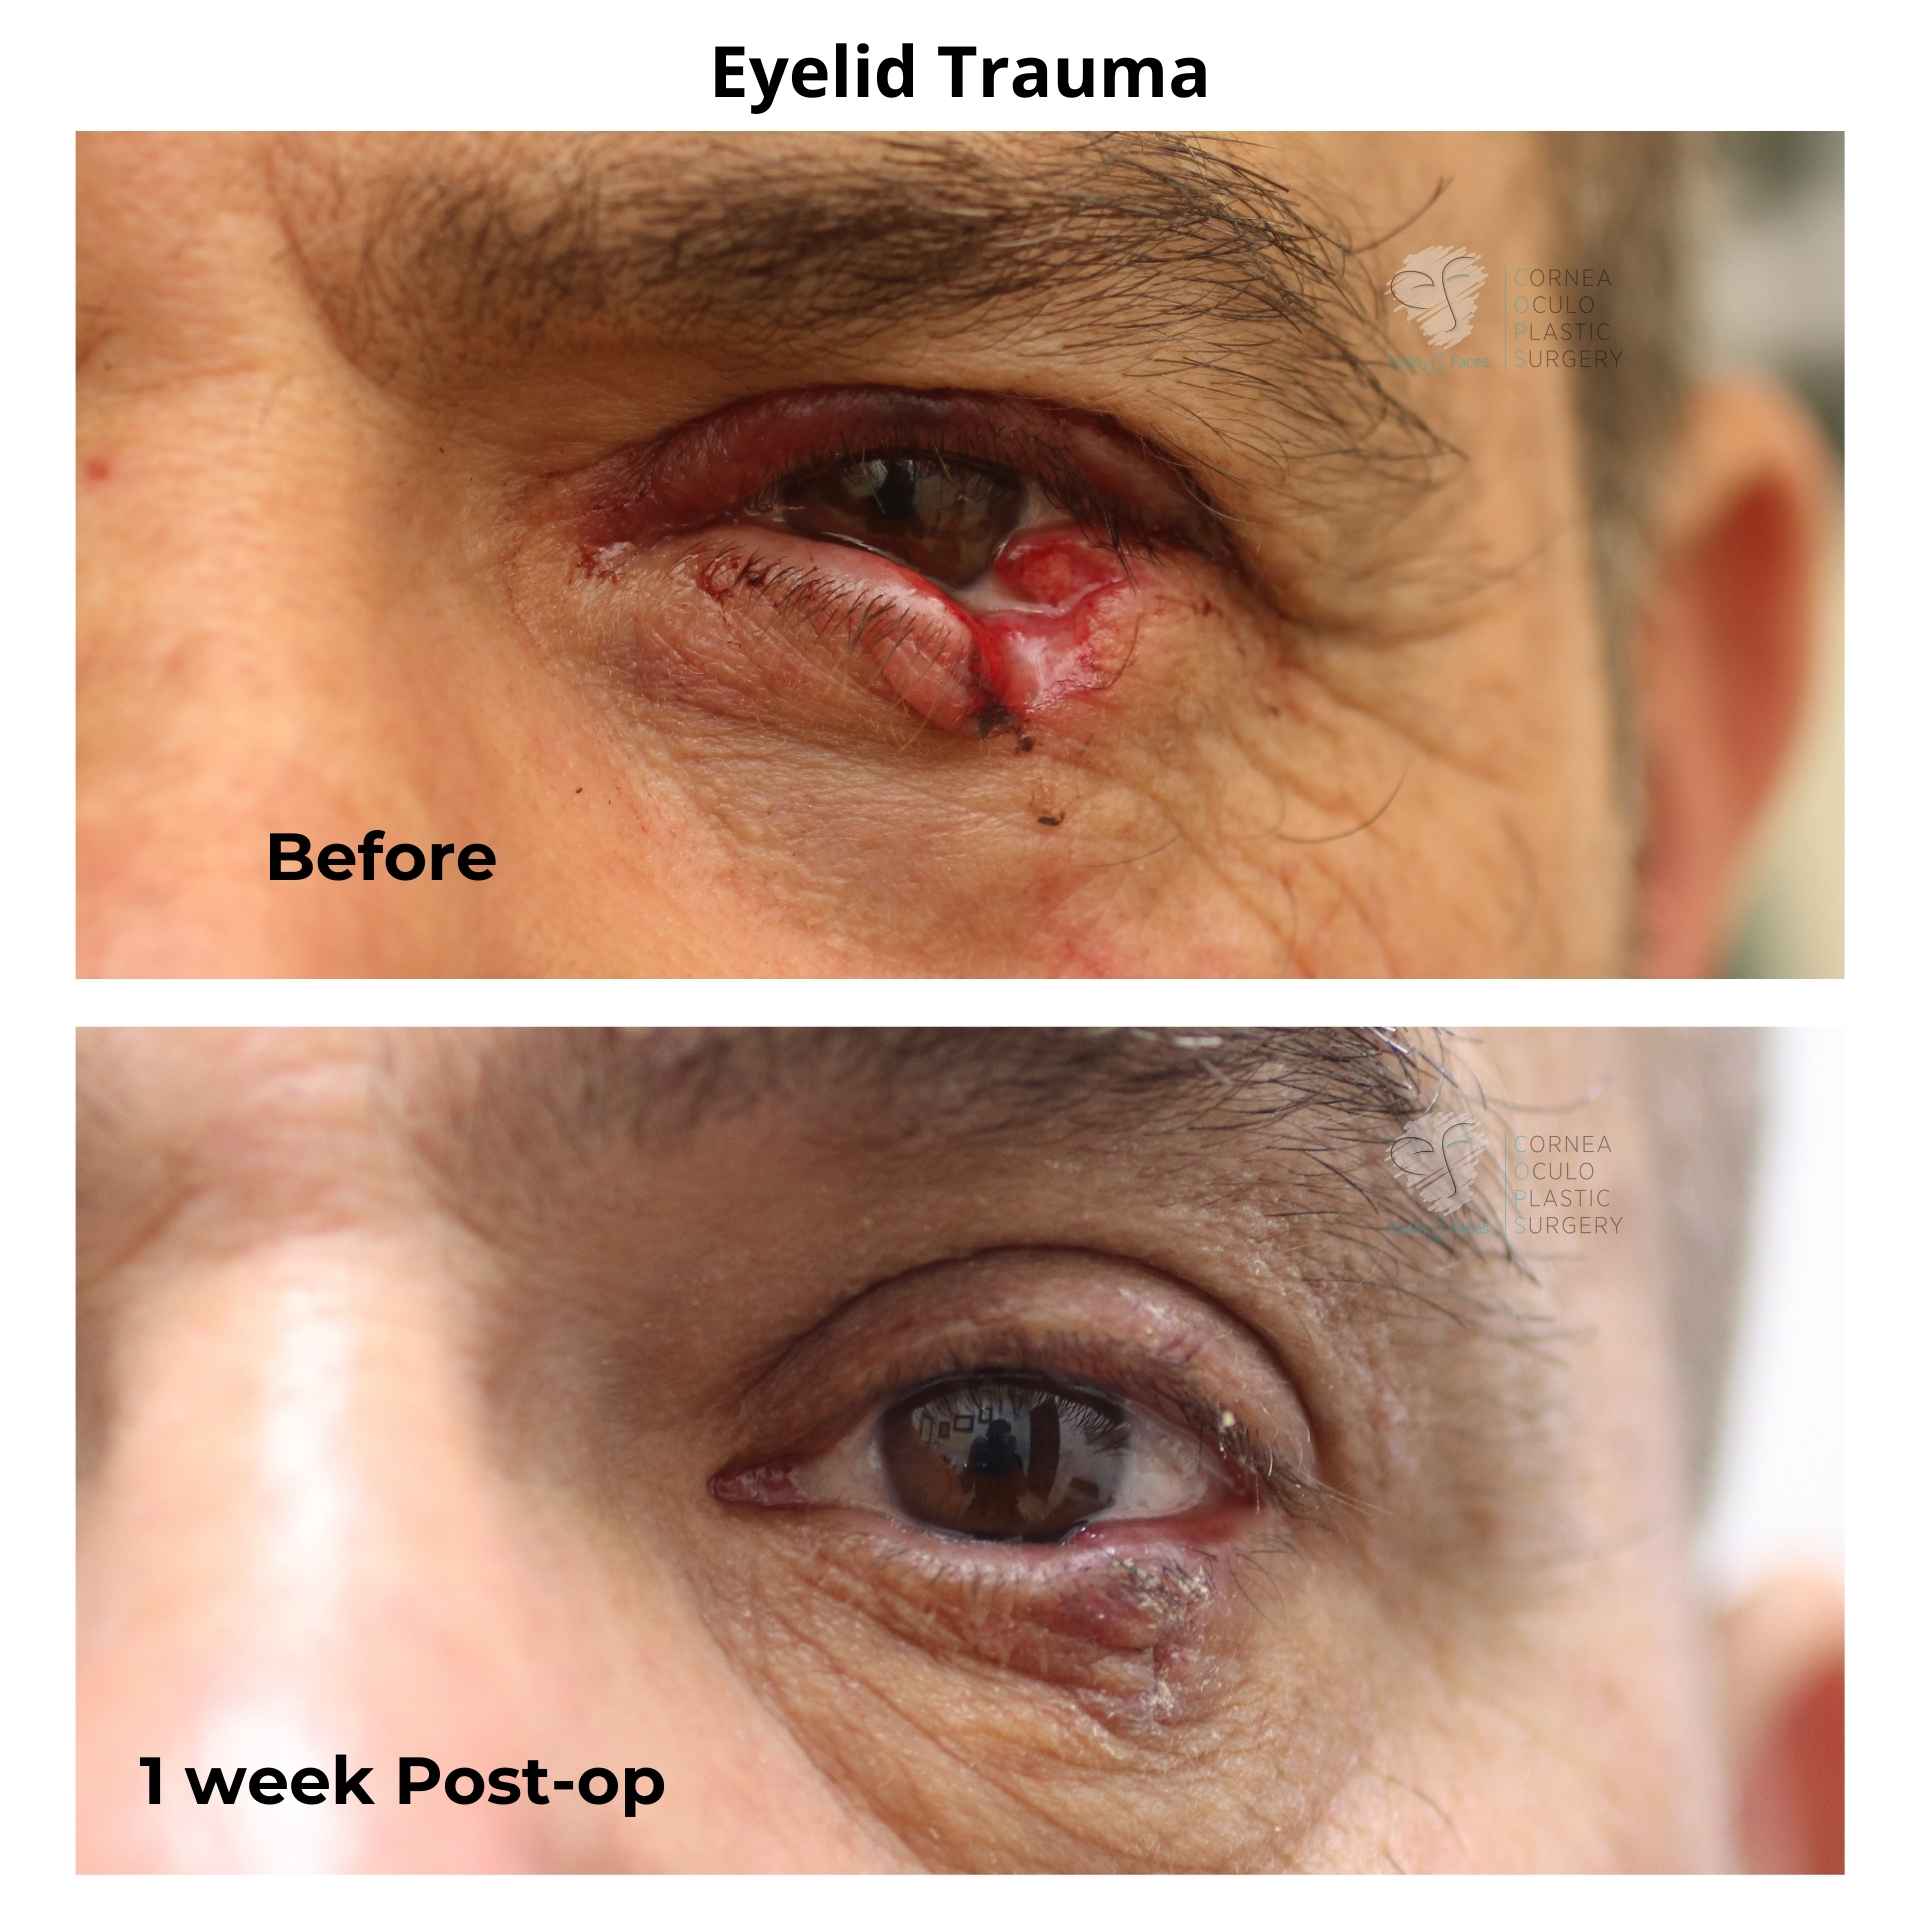 Before and after photo of eyelid trauma. After photo is at 1 week post operatively after Dr Anthony Maloof performed a repair.